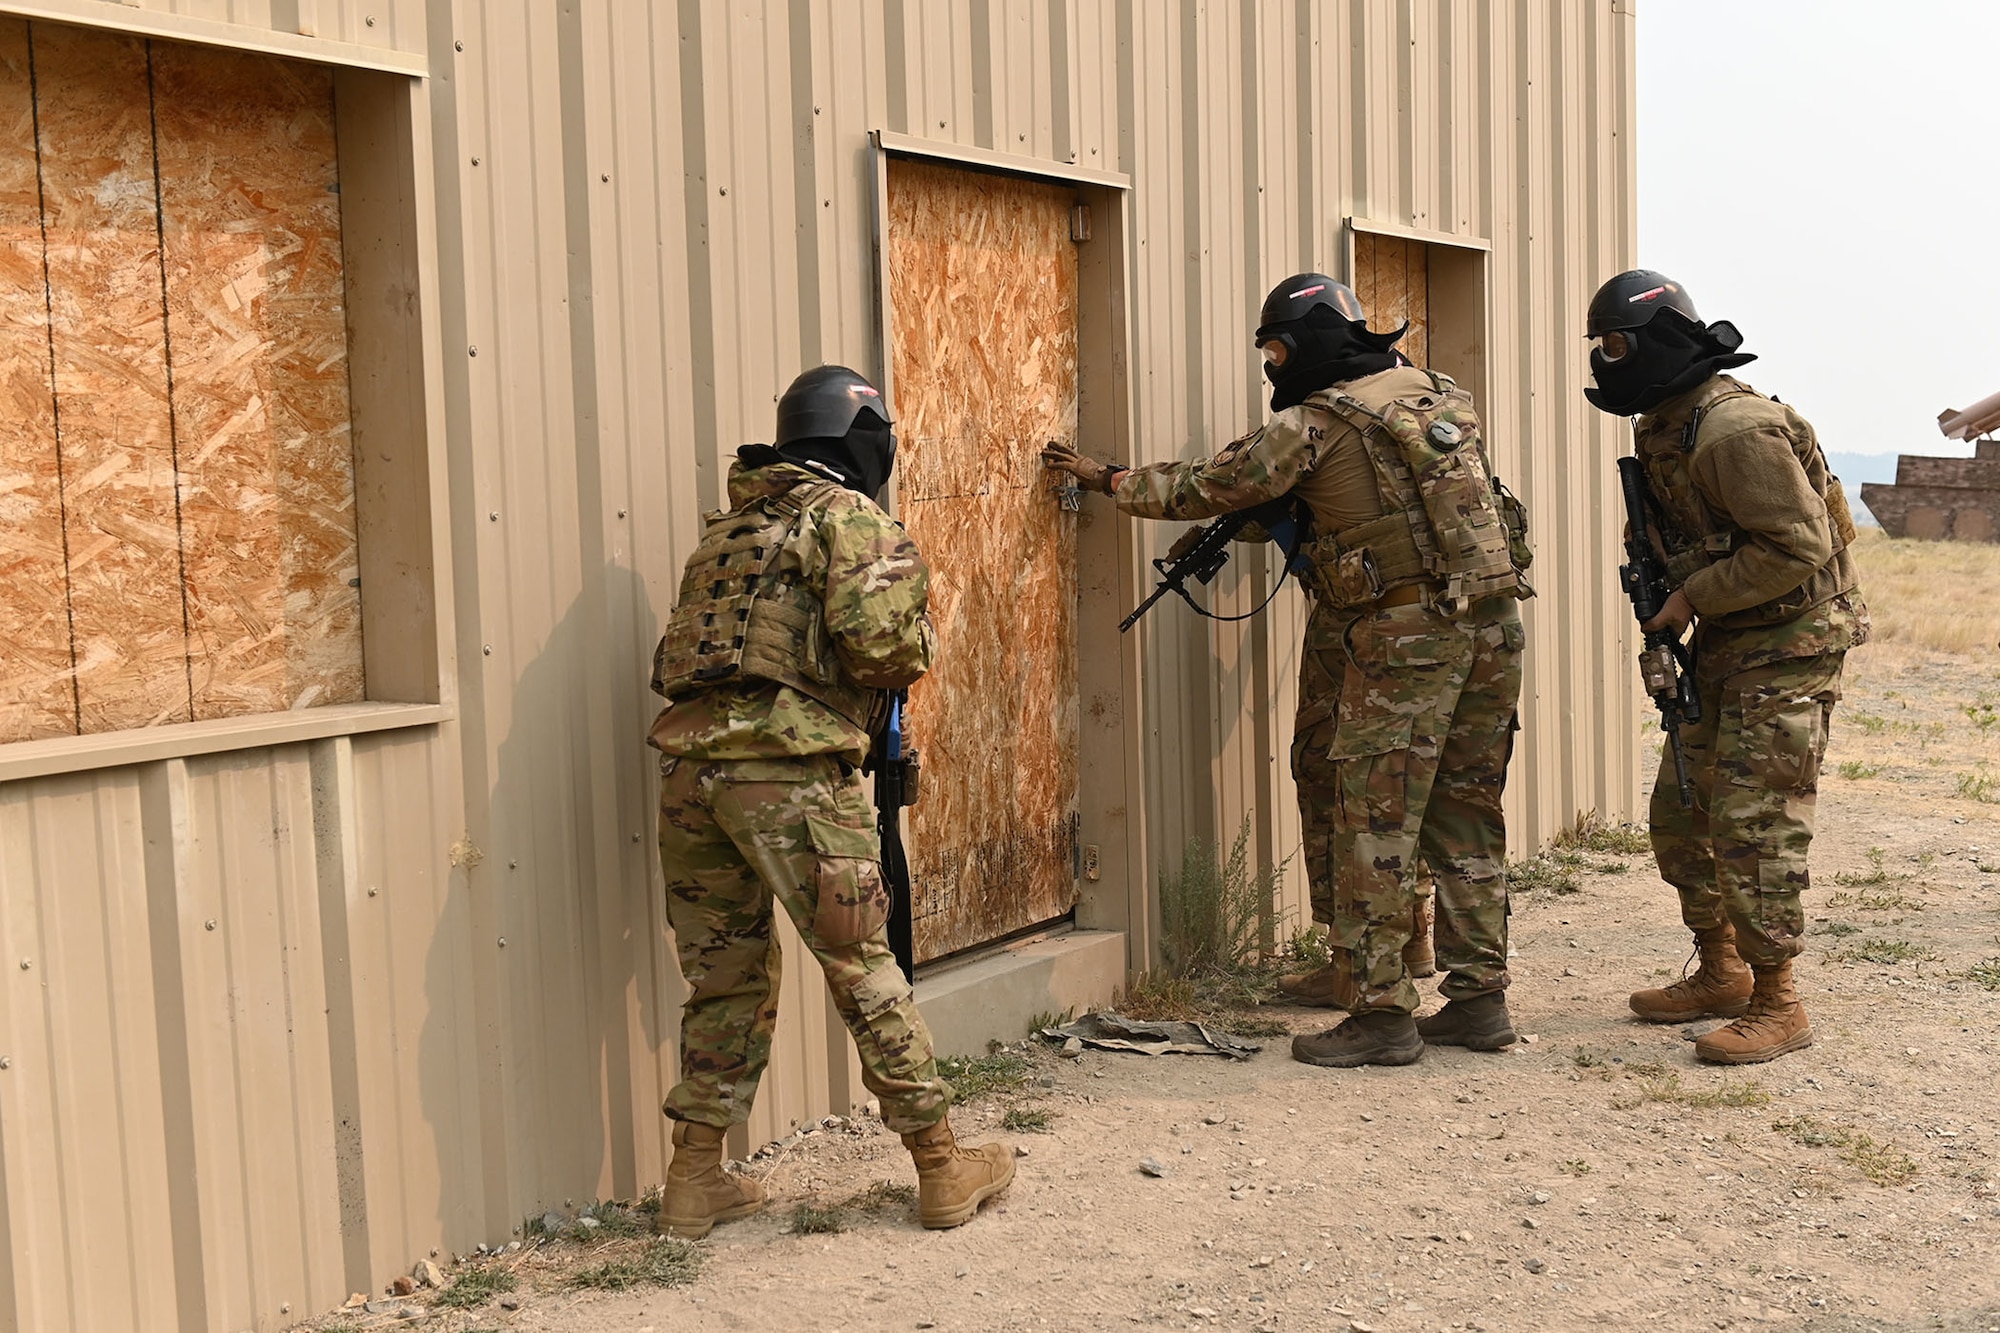 Defenders from the 841st Missile Security Forces Squadron prepare to breach a door Aug. 17, 2021, during a training exercise at the firing range village on Fort Harrison, Mont. The breach teams consisted of four defenders, who move through the building in specific formations to maximize vision and lethality. The training exercise is designed to teach defenders the proper technique of moving as a breaching unit, while simultaneously increasing confidence in stressful situations. (U.S. Air Force photo by Airman Elijah Van Zandt)